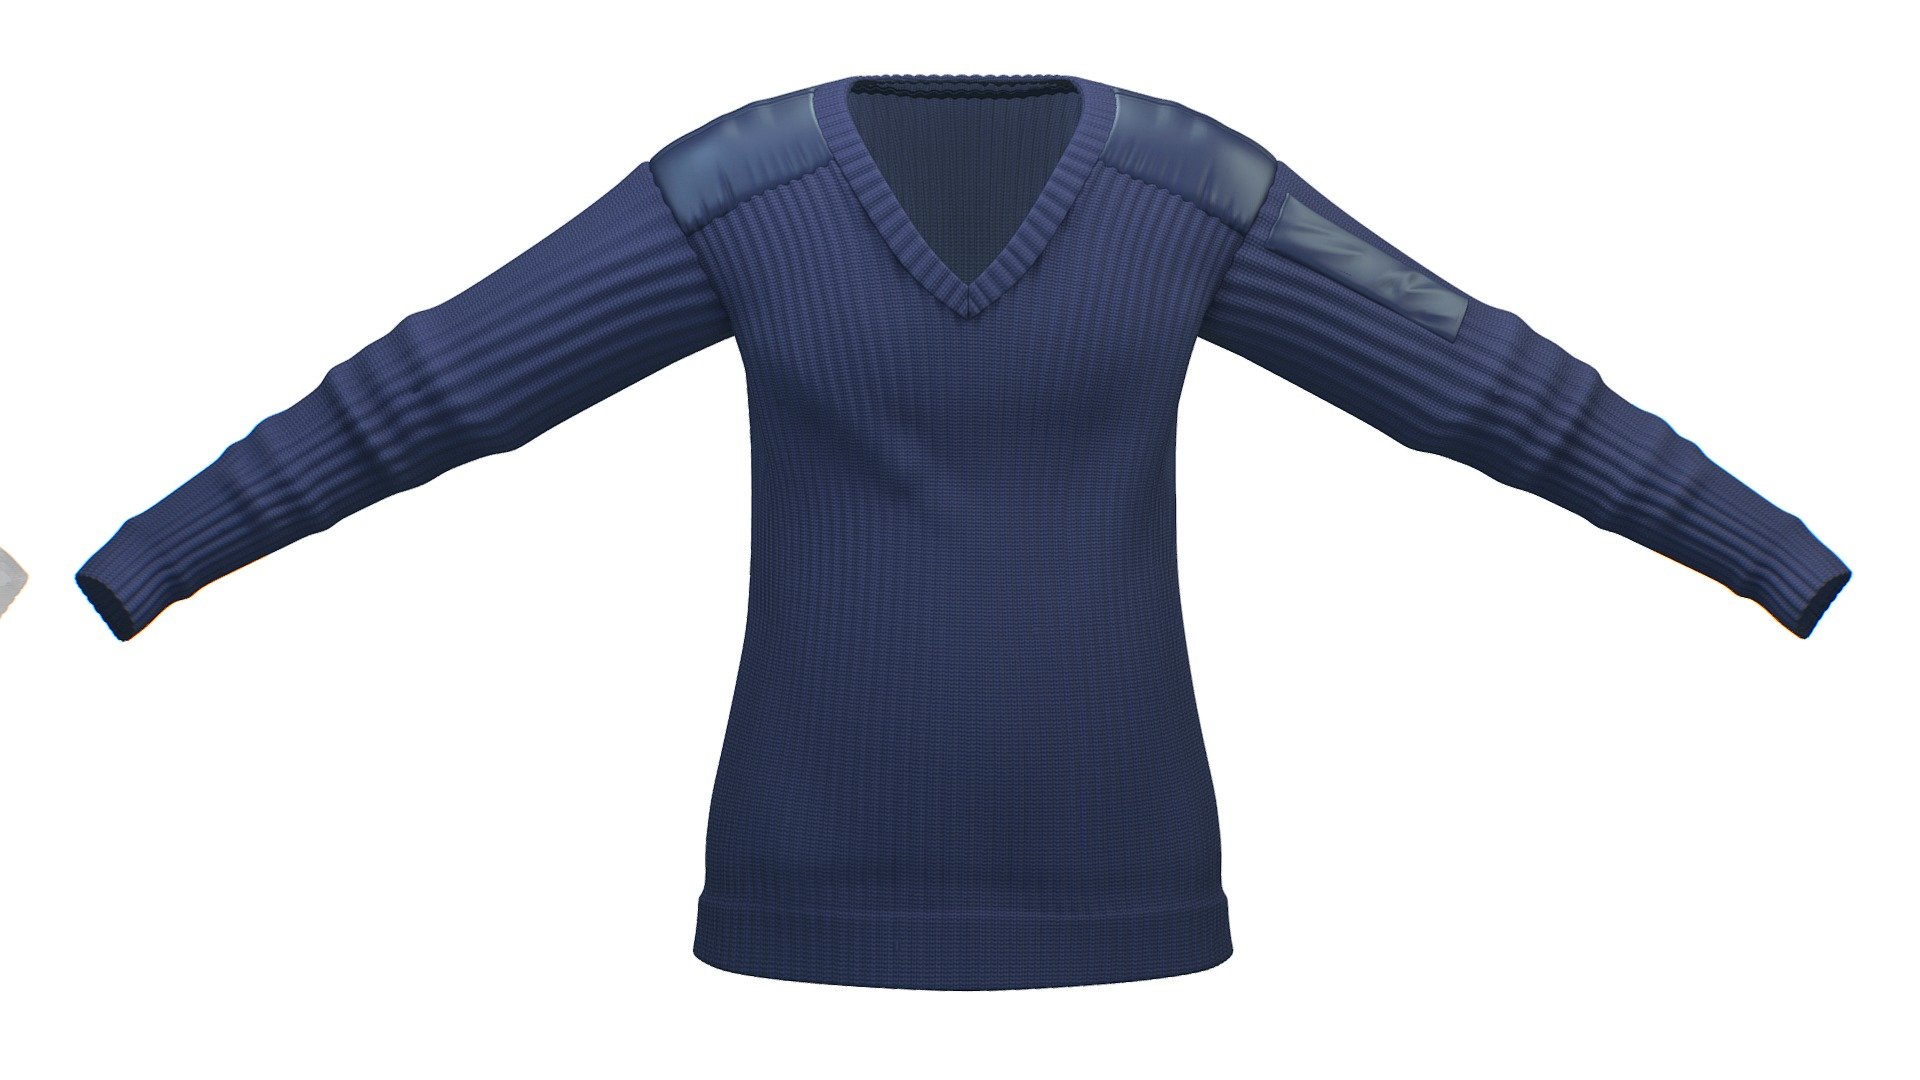 Cartoon High Poly Subdivision Blue Sweater

No HDRI map, No Light, No material settings - only Diffuse/Color Map Texture (3000Х3000) 

More information about the 3D model: please use the Sketchfab Model Inspector - Key (i) - Cartoon High Poly Subdivision Blue Sweater - Buy Royalty Free 3D model by Oleg Shuldiakov (@olegshuldiakov) 3d model